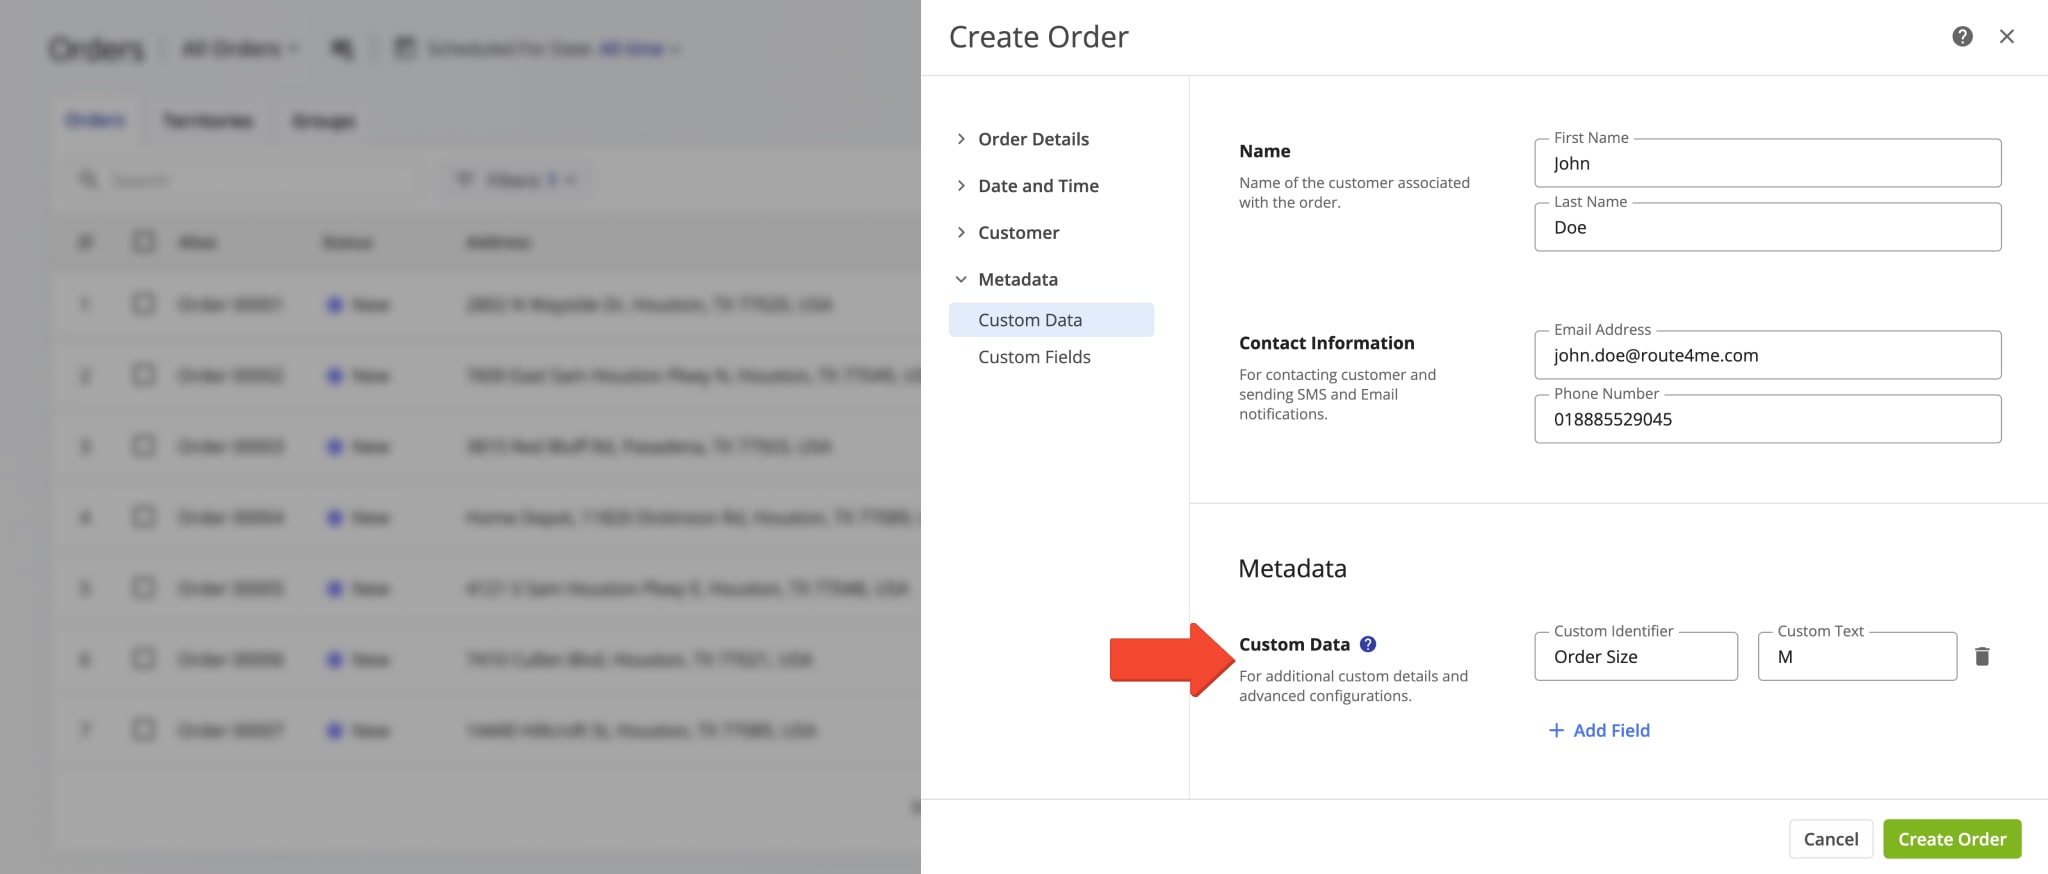 Adding Custom Data to assign custom order attributes and parameters to orders in Route4Me's Delivery Management System.